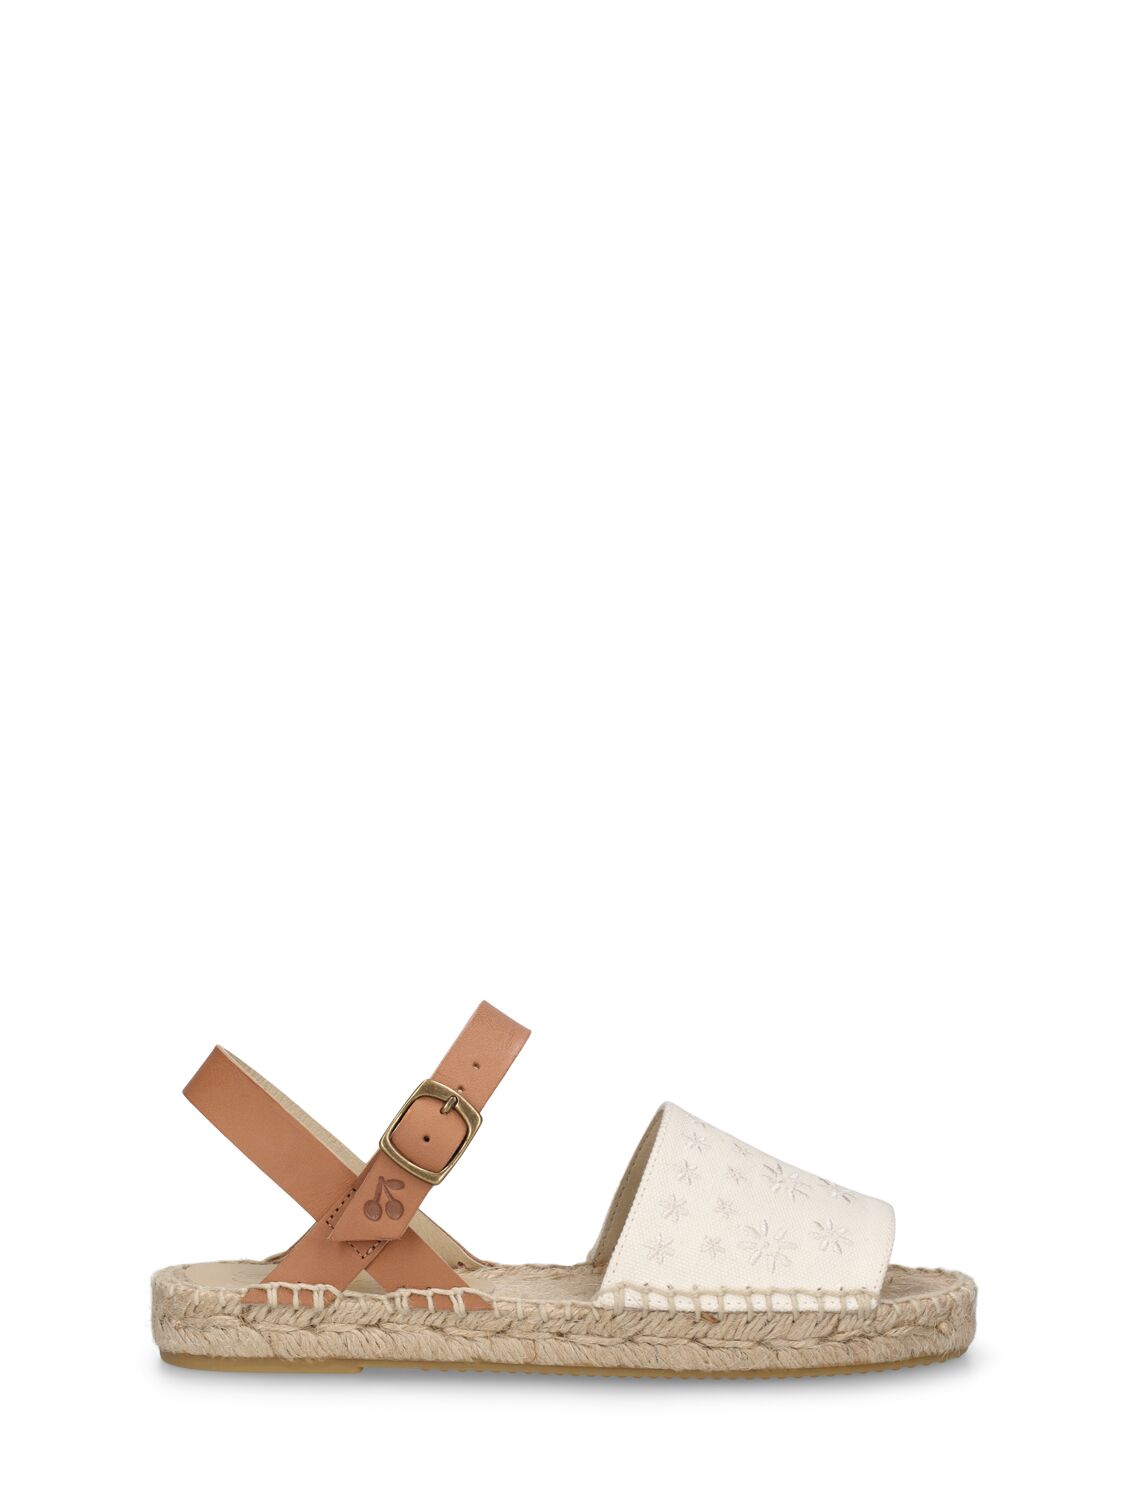 Image of Leather & Cotton Sandals